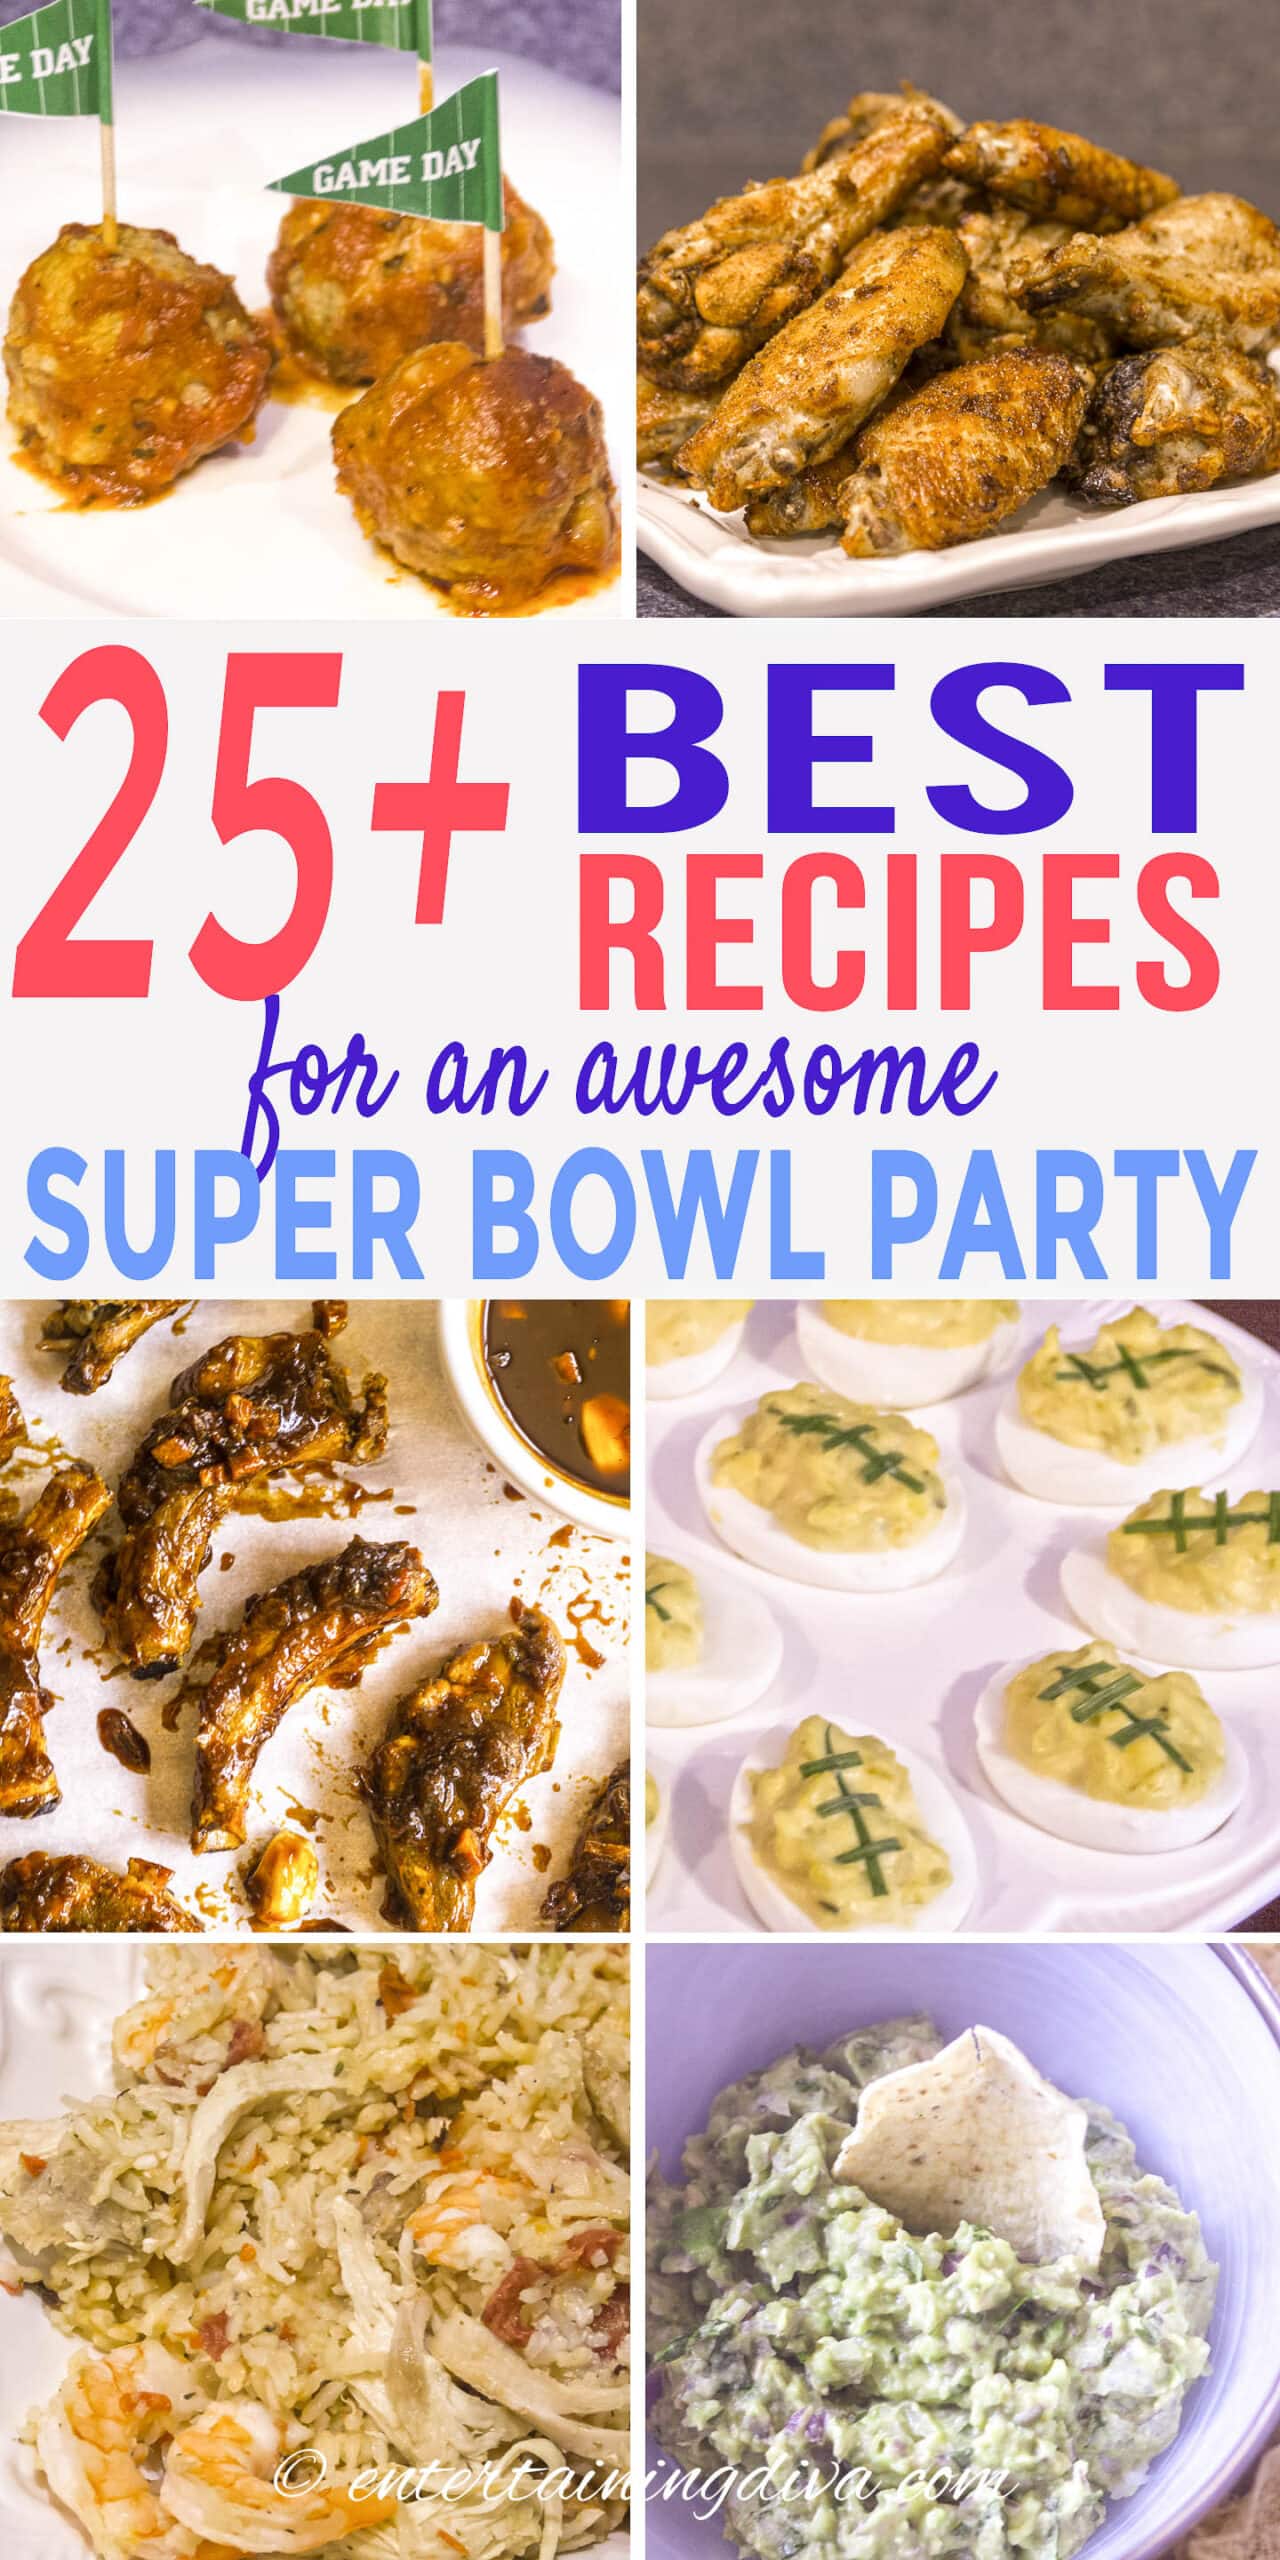 Super bowl party menu including slow cooker meatballs, spiced wings, ribs with BBQ sauce, football deviled eggs, jambalaya and guacamole dip